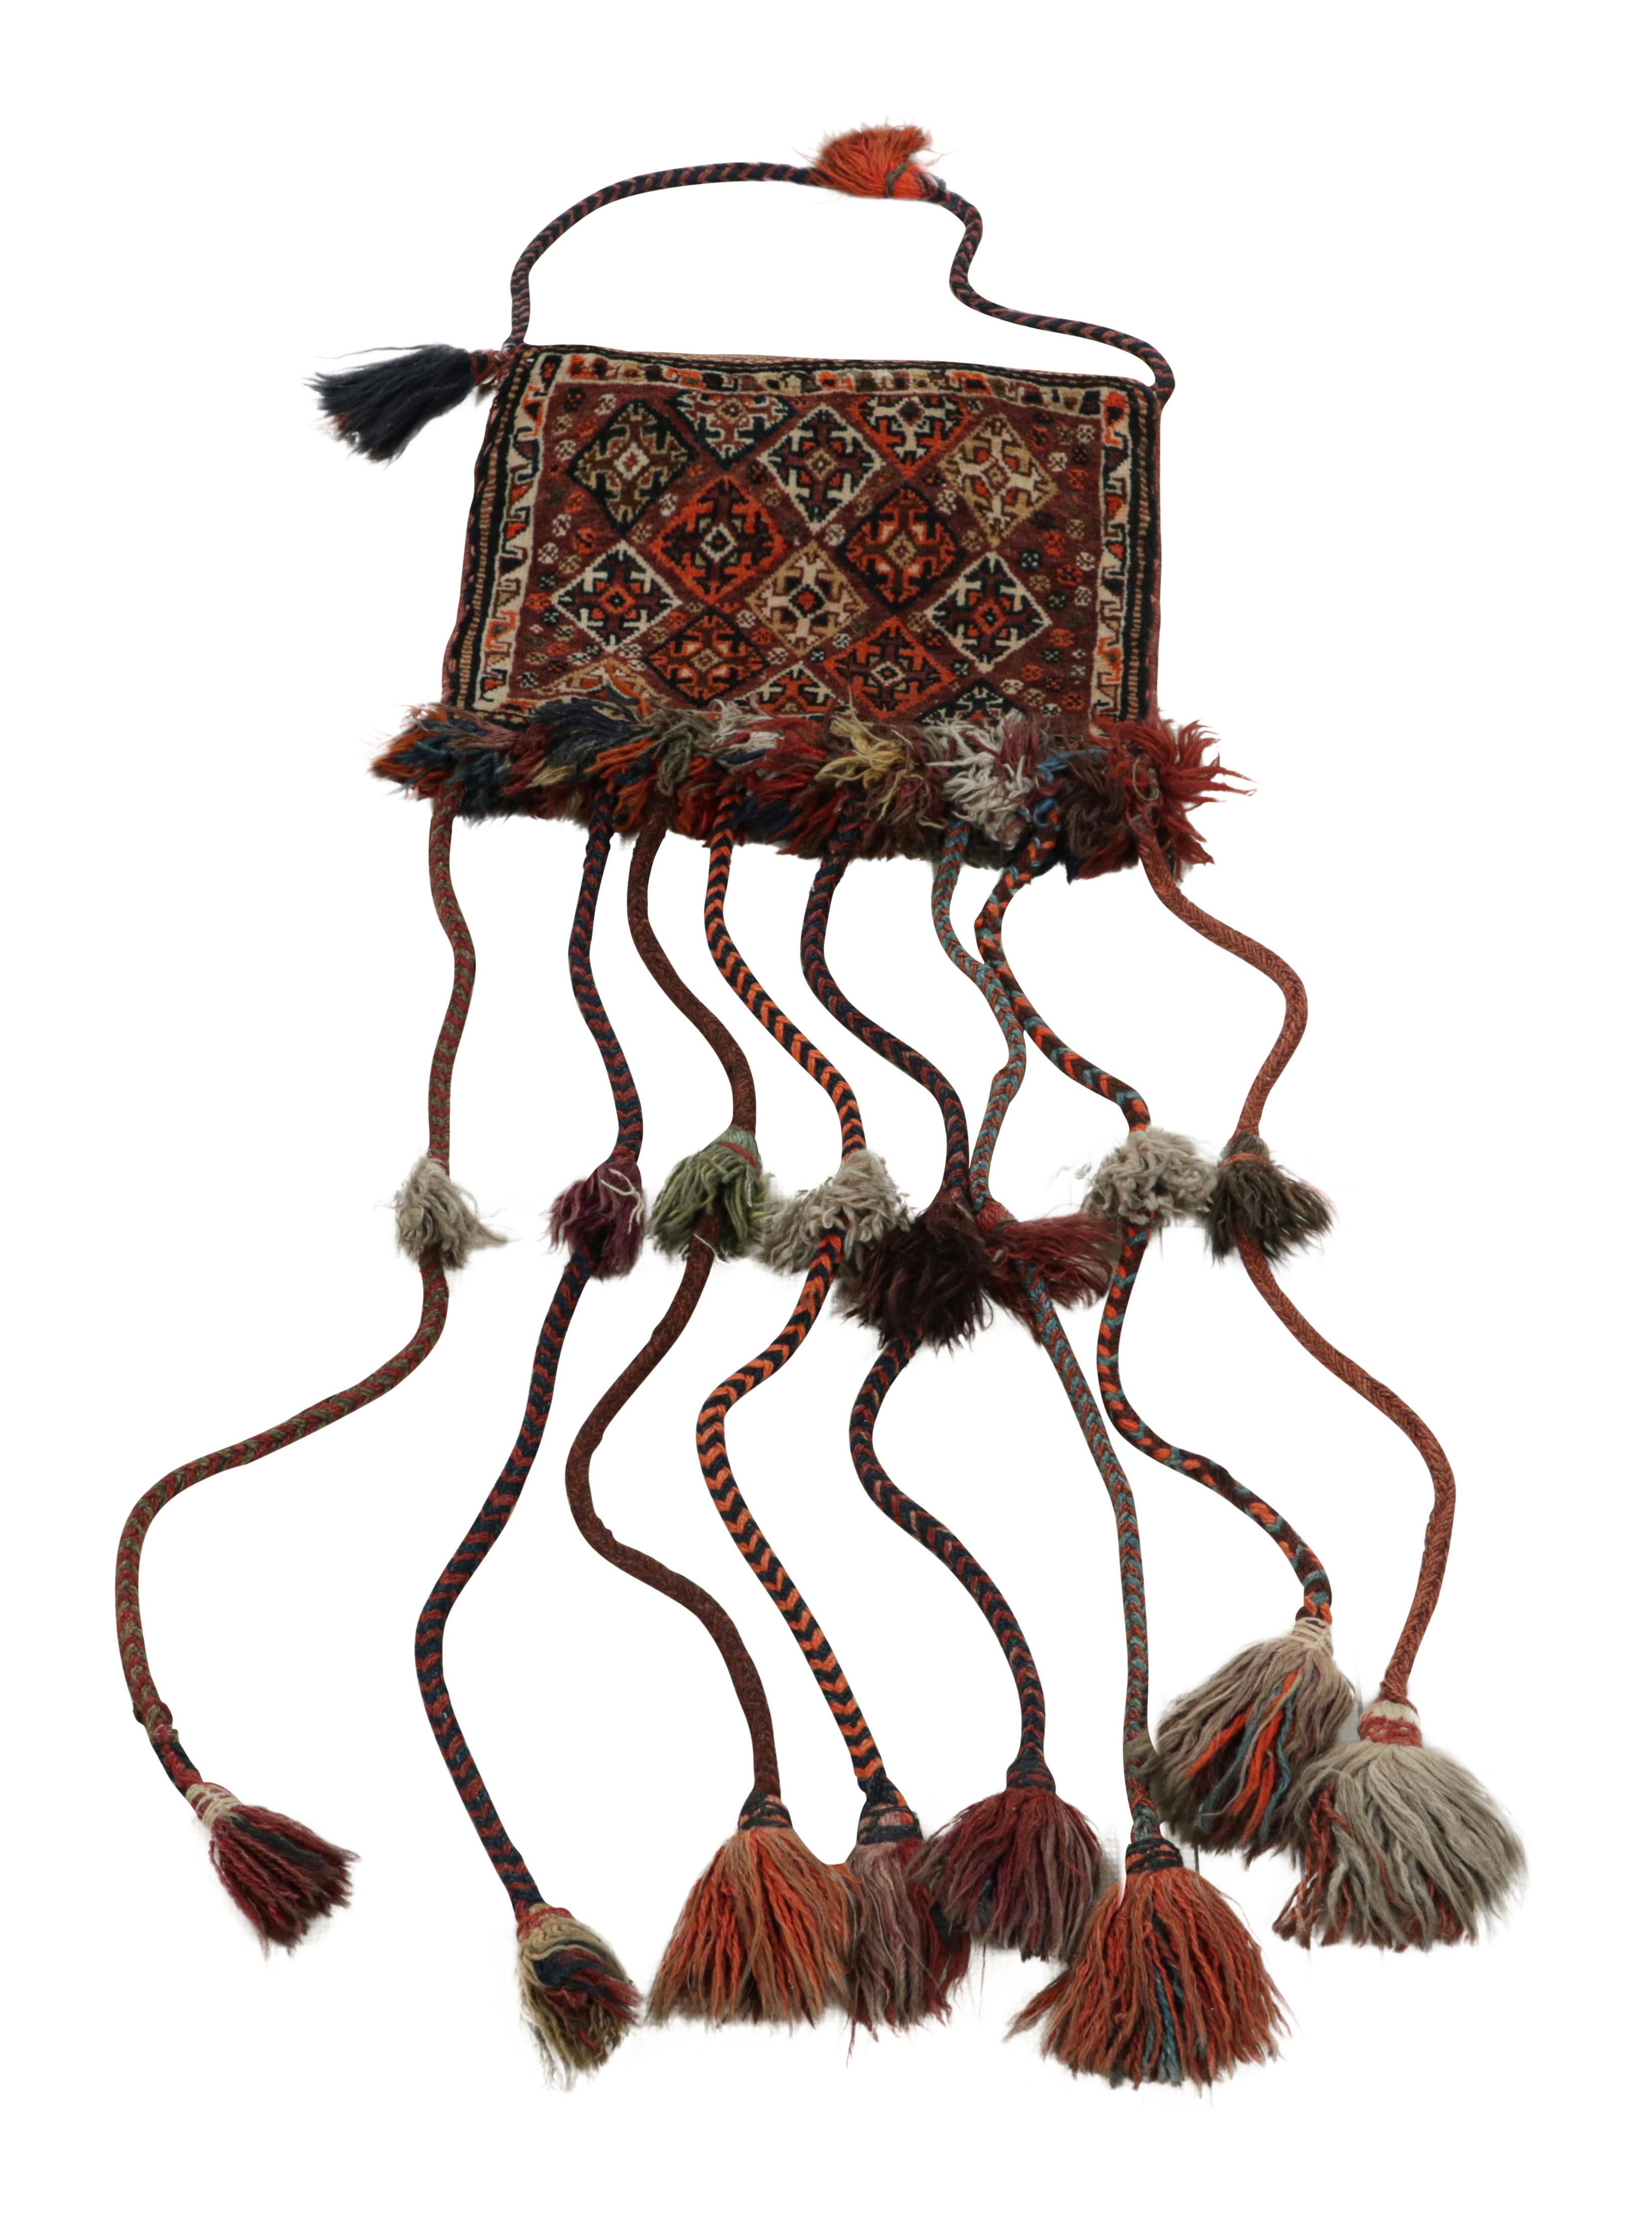 Hand-Woven Antique Persian Tribal Salt Bag with Geometric Patterns, from Rug & Kilim For Sale